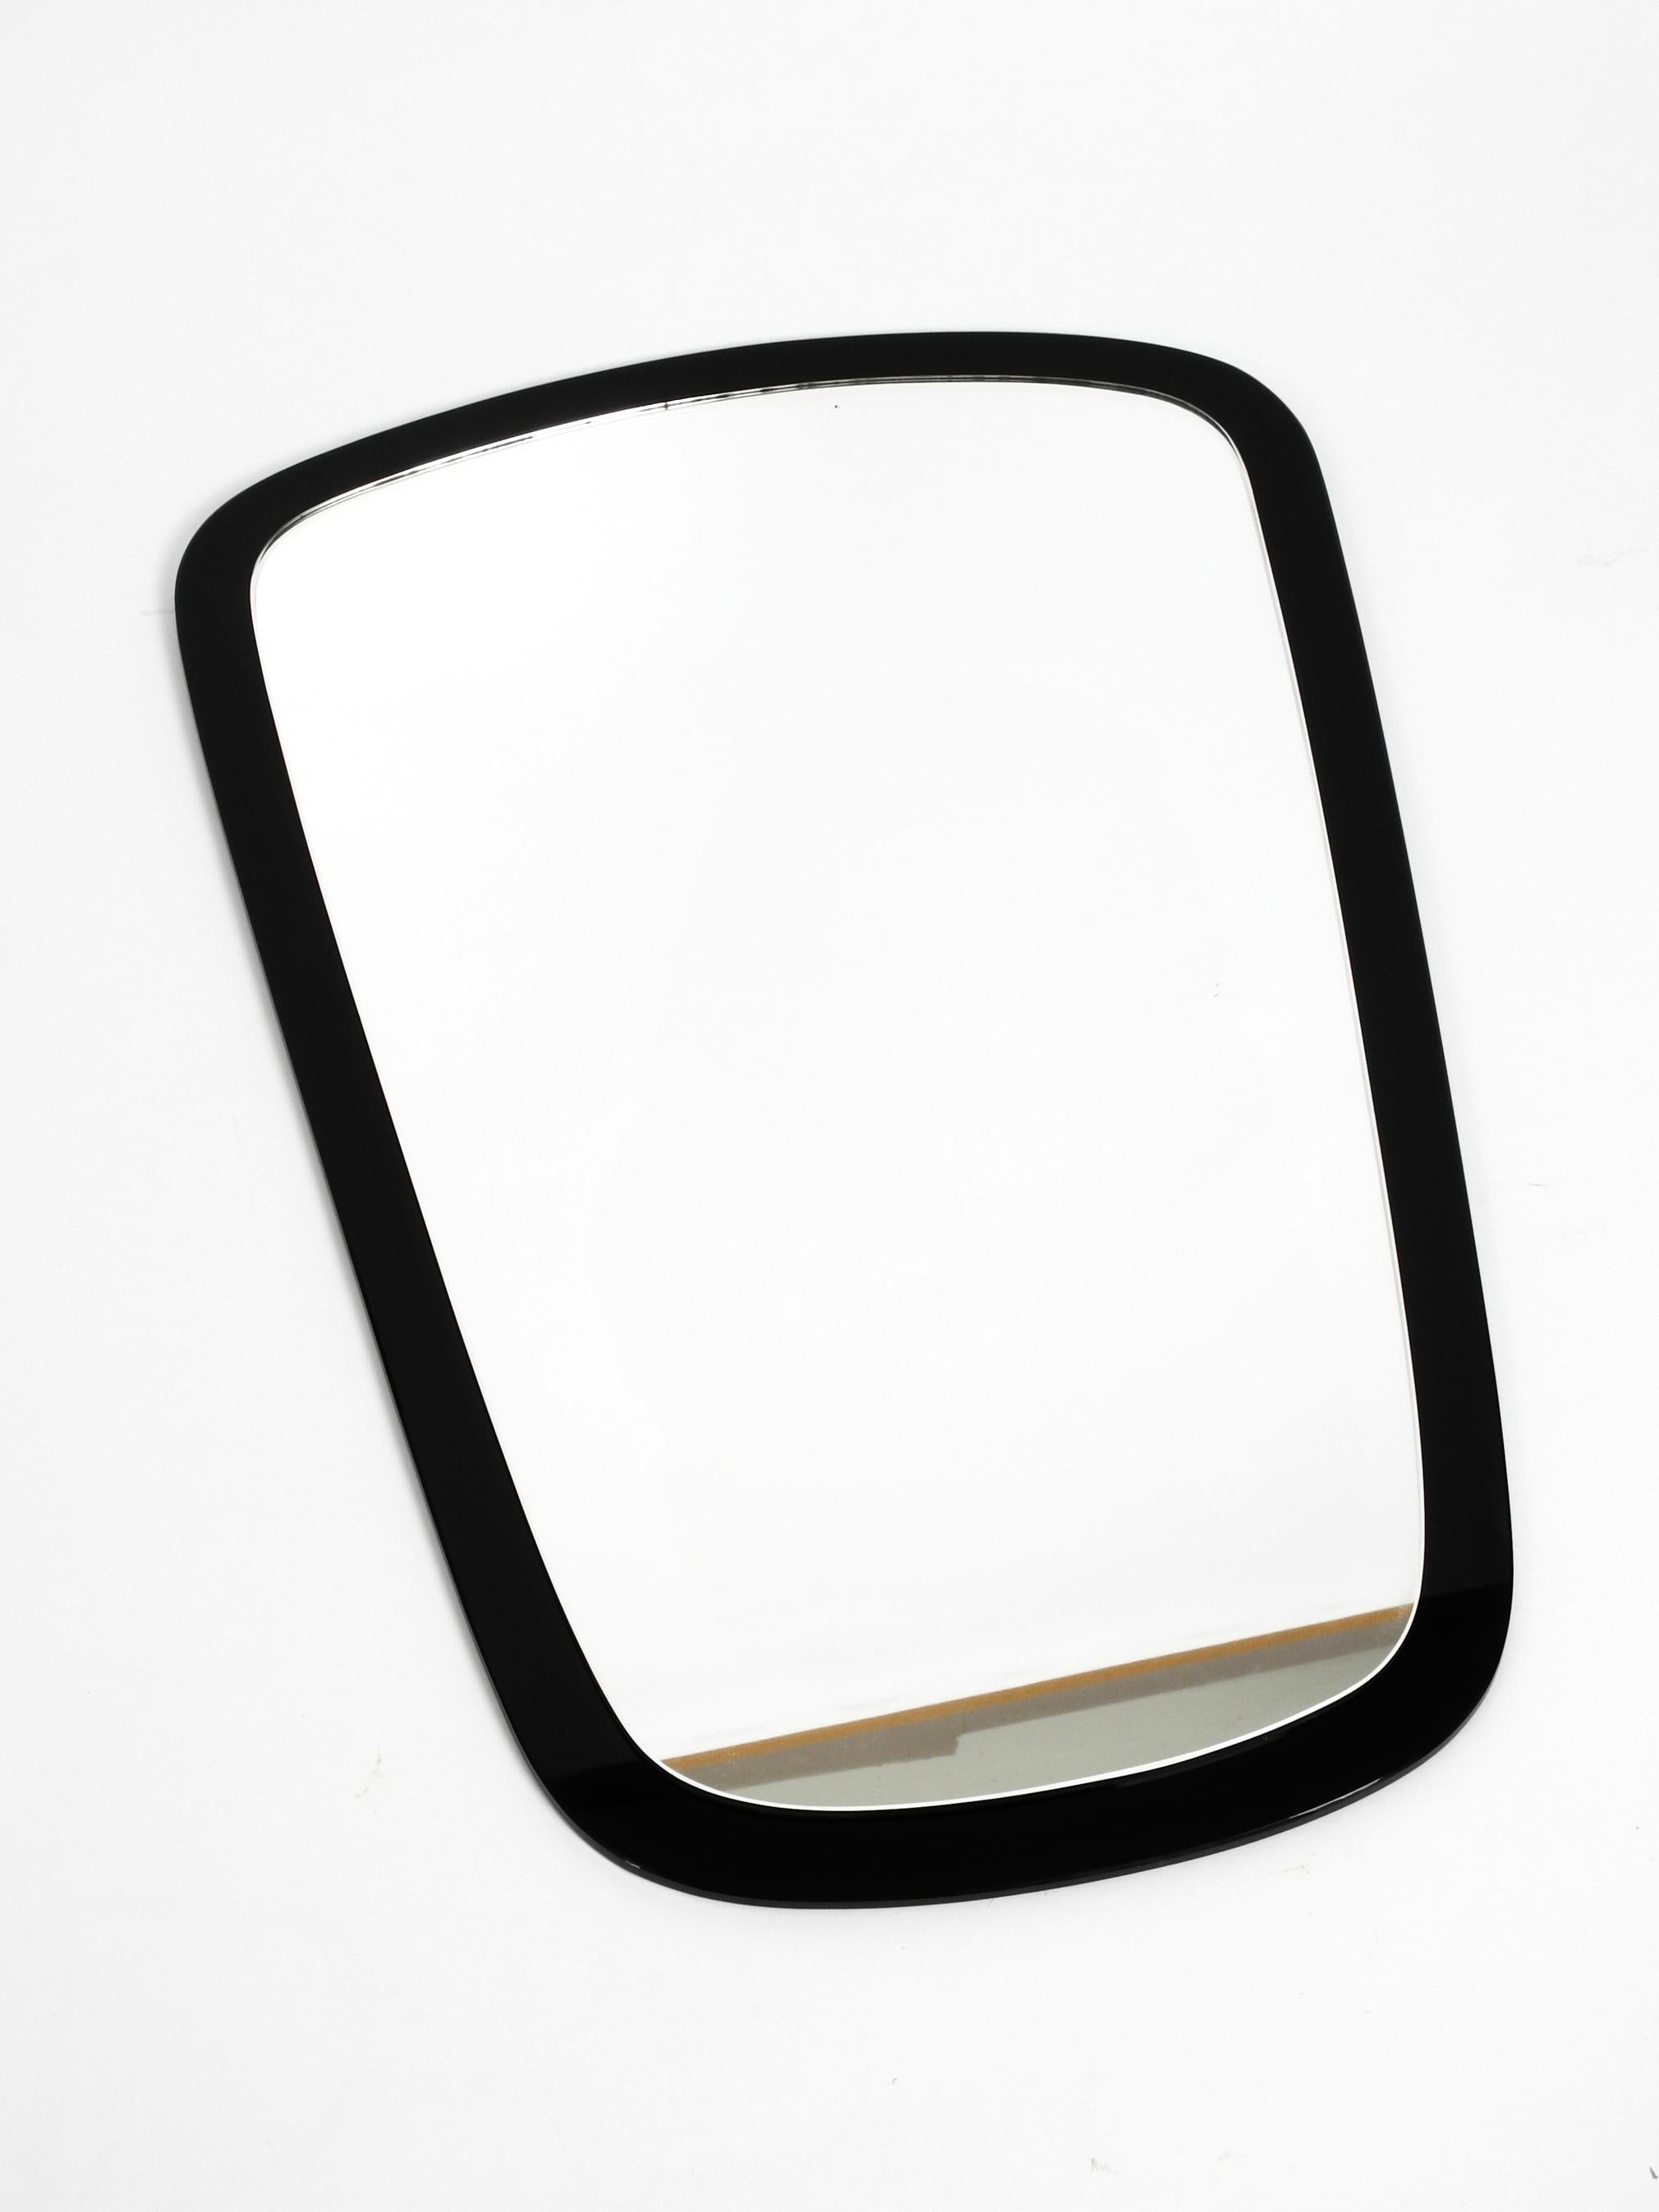 Beautiful high quality Mid-Century Modern double glass wall mirror. 
The mirror glass is glued to a black heavy glass background. 
Great minimalistic exceptional design. Very heavy weight about 6 kg.
Very good vintage condition. No damages to the